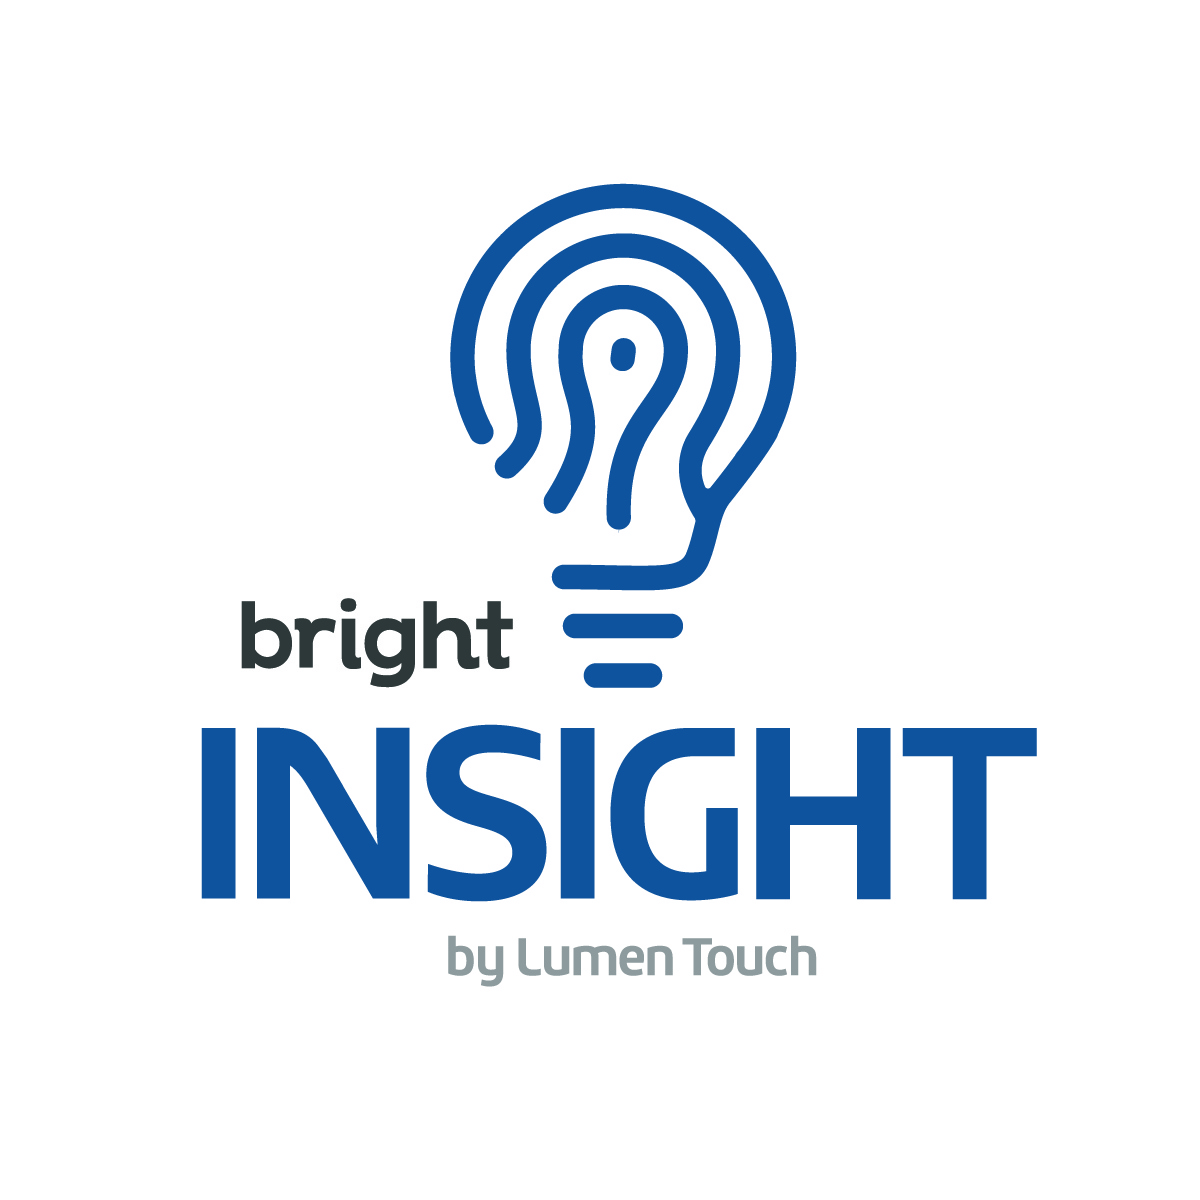 Bright Insight by Lumen Touch